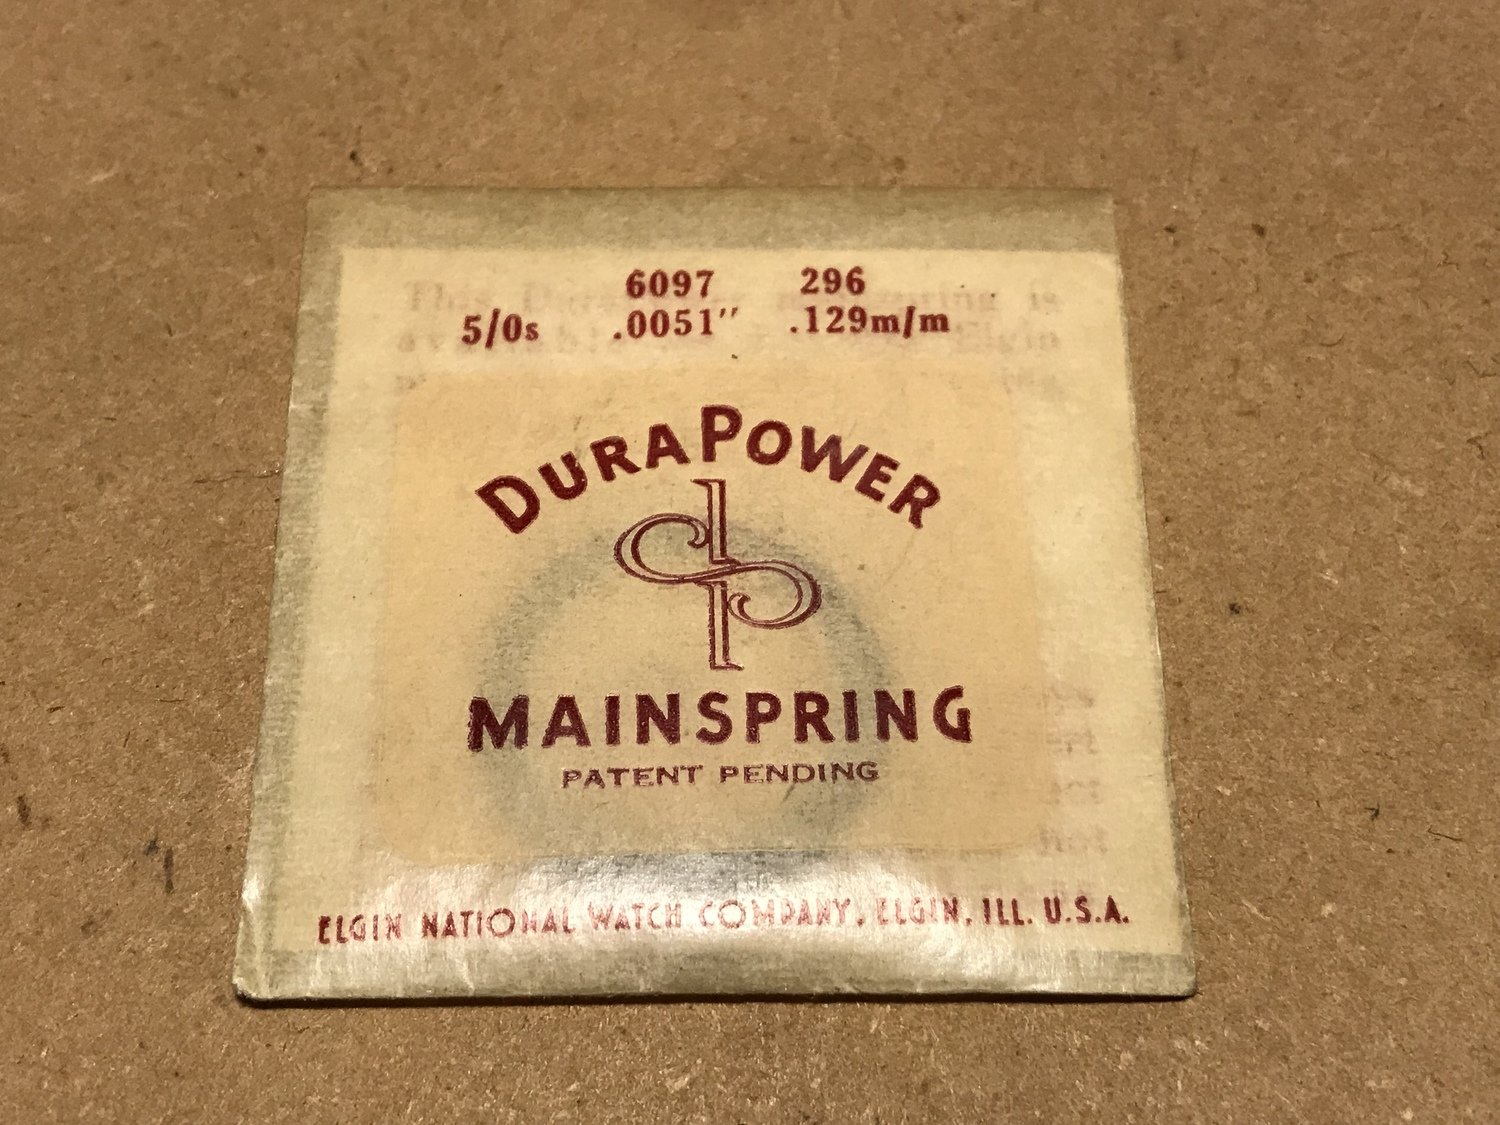 Elgin DuraPower Mainspring for 5/0s movements #6097 - Alloy